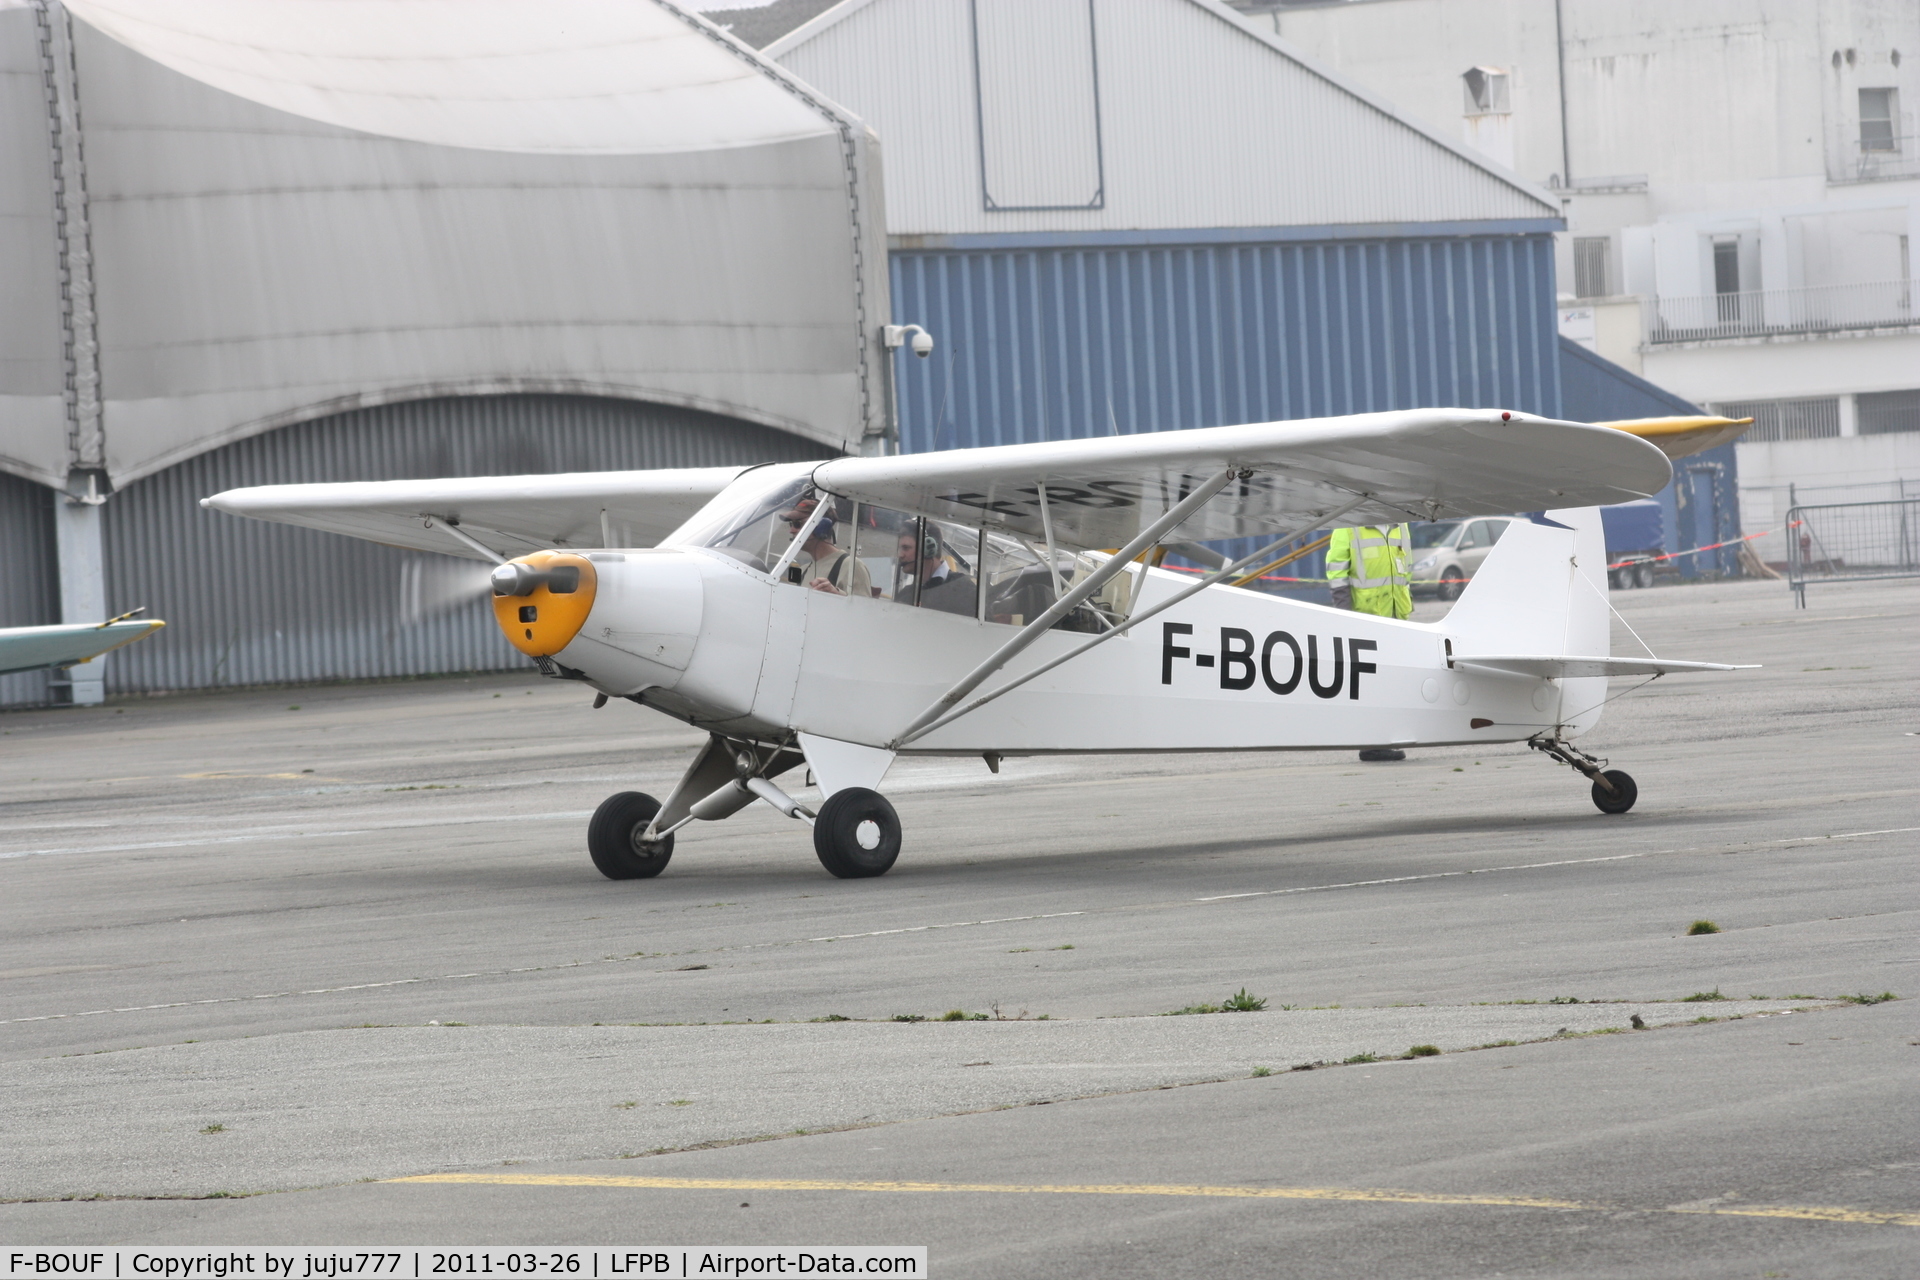 F-BOUF, Piper PA-19 Super Cub C/N 18-1476, on transit at Le Bourget